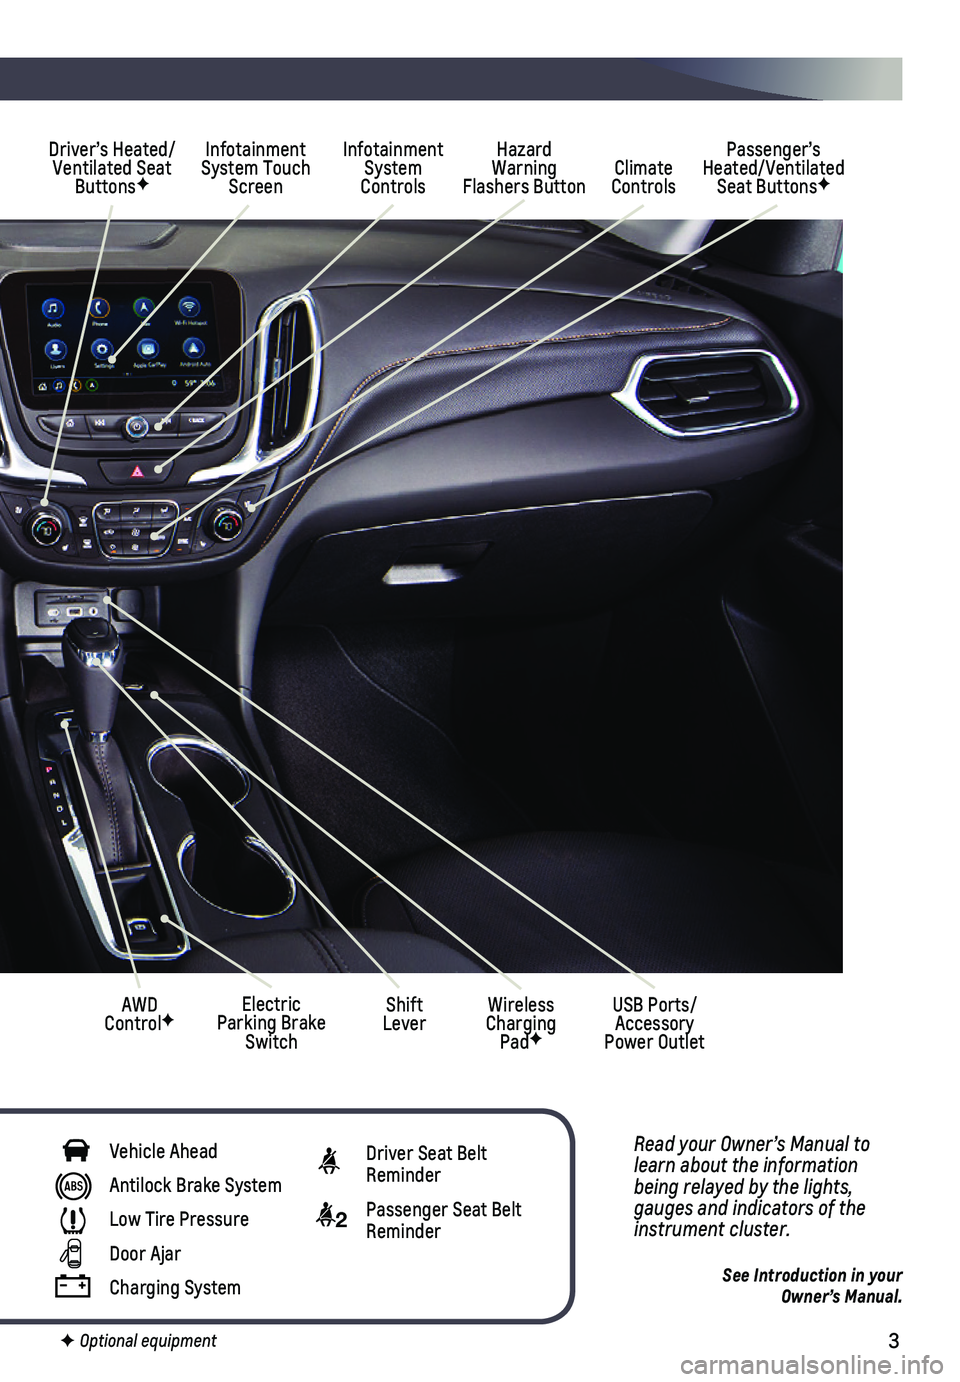 CHEVROLET EQUINOX 2021  Get To Know Guide 3
Read your Owner’s Manual to learn about the information being relayed by the lights, gauges and indicators of the instrument cluster.
See Introduction in your  Owner’s Manual.
F Optional equipme